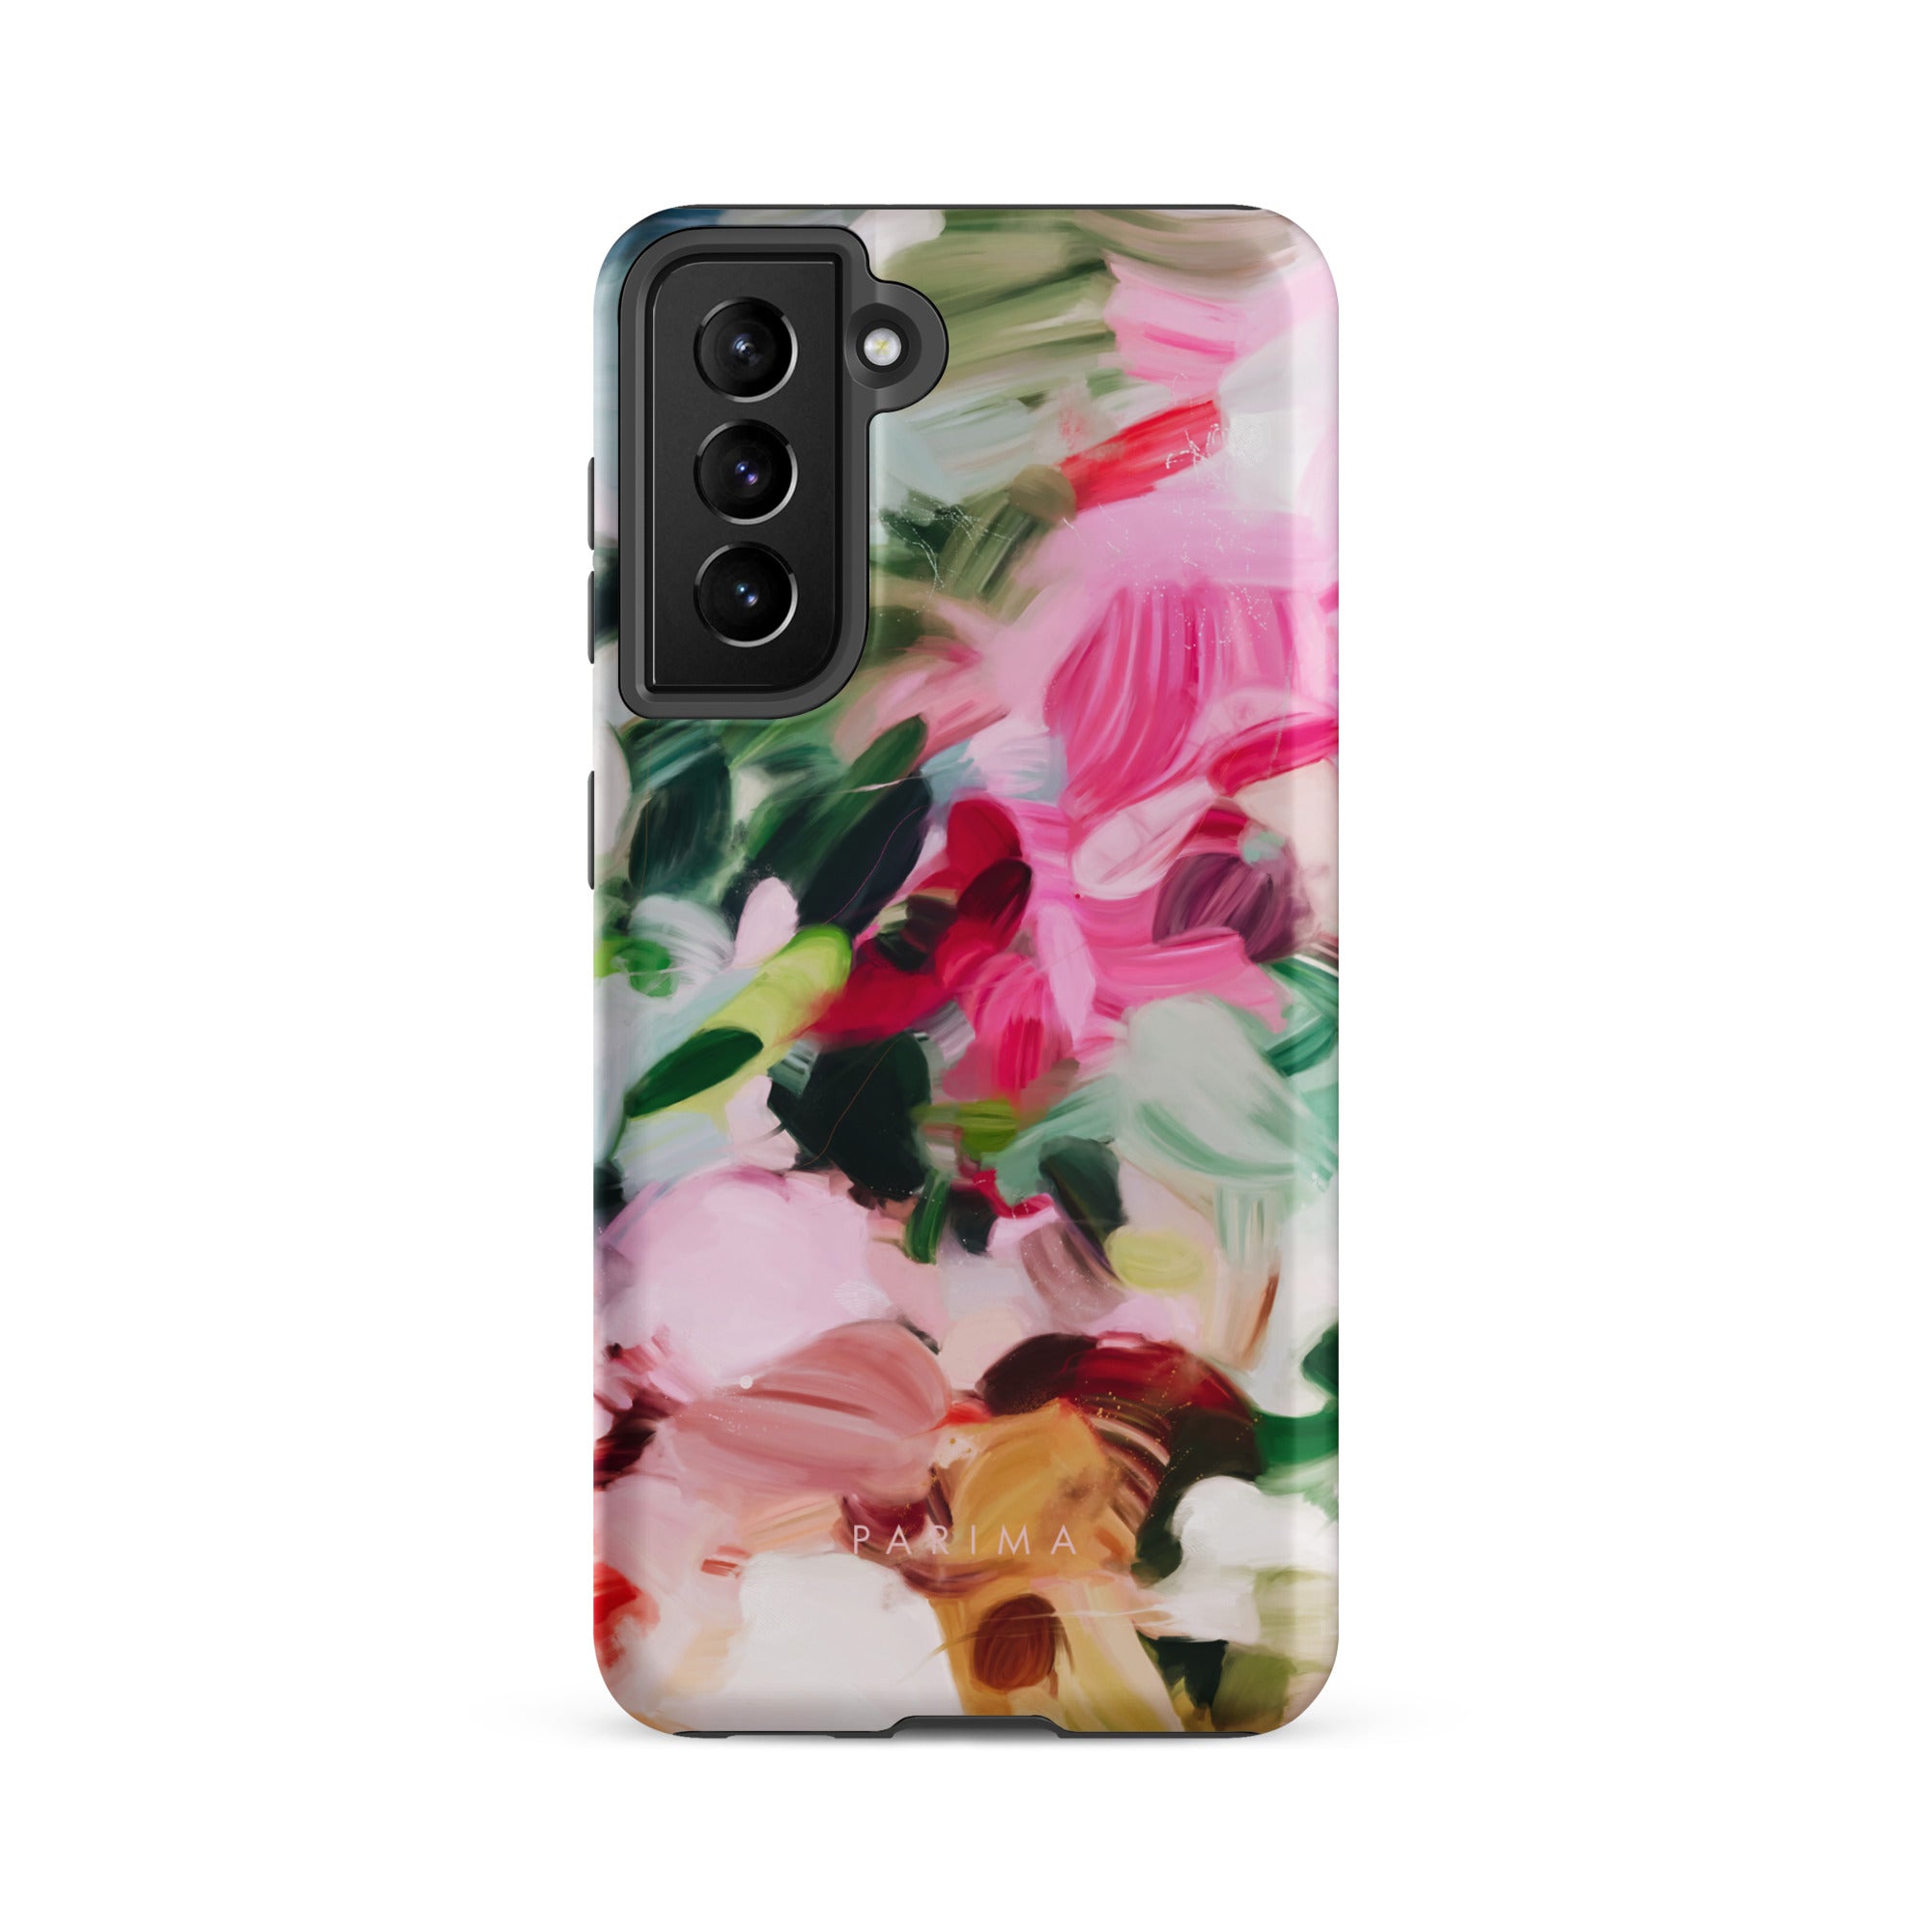 Bloom, pink and green abstract art on Samsung Galaxy S21 FE tough case by Parima Studio